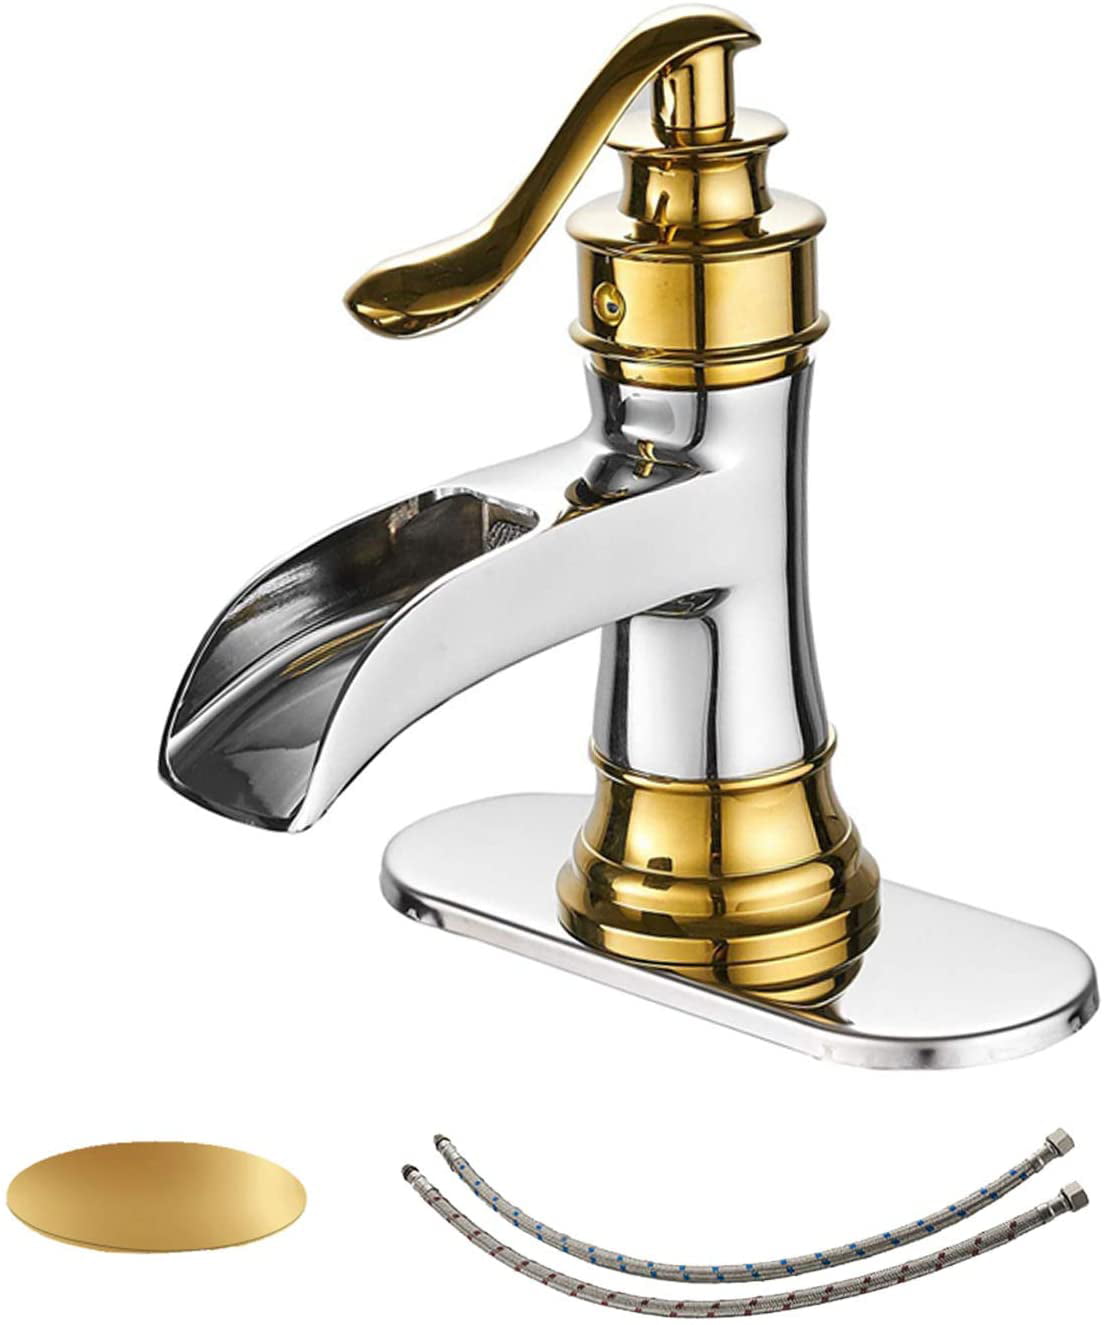 Details about   Home Sink Pop Up Drain Brass Waste With Overflow Gold Stopper Plumbing Pipe Kit 